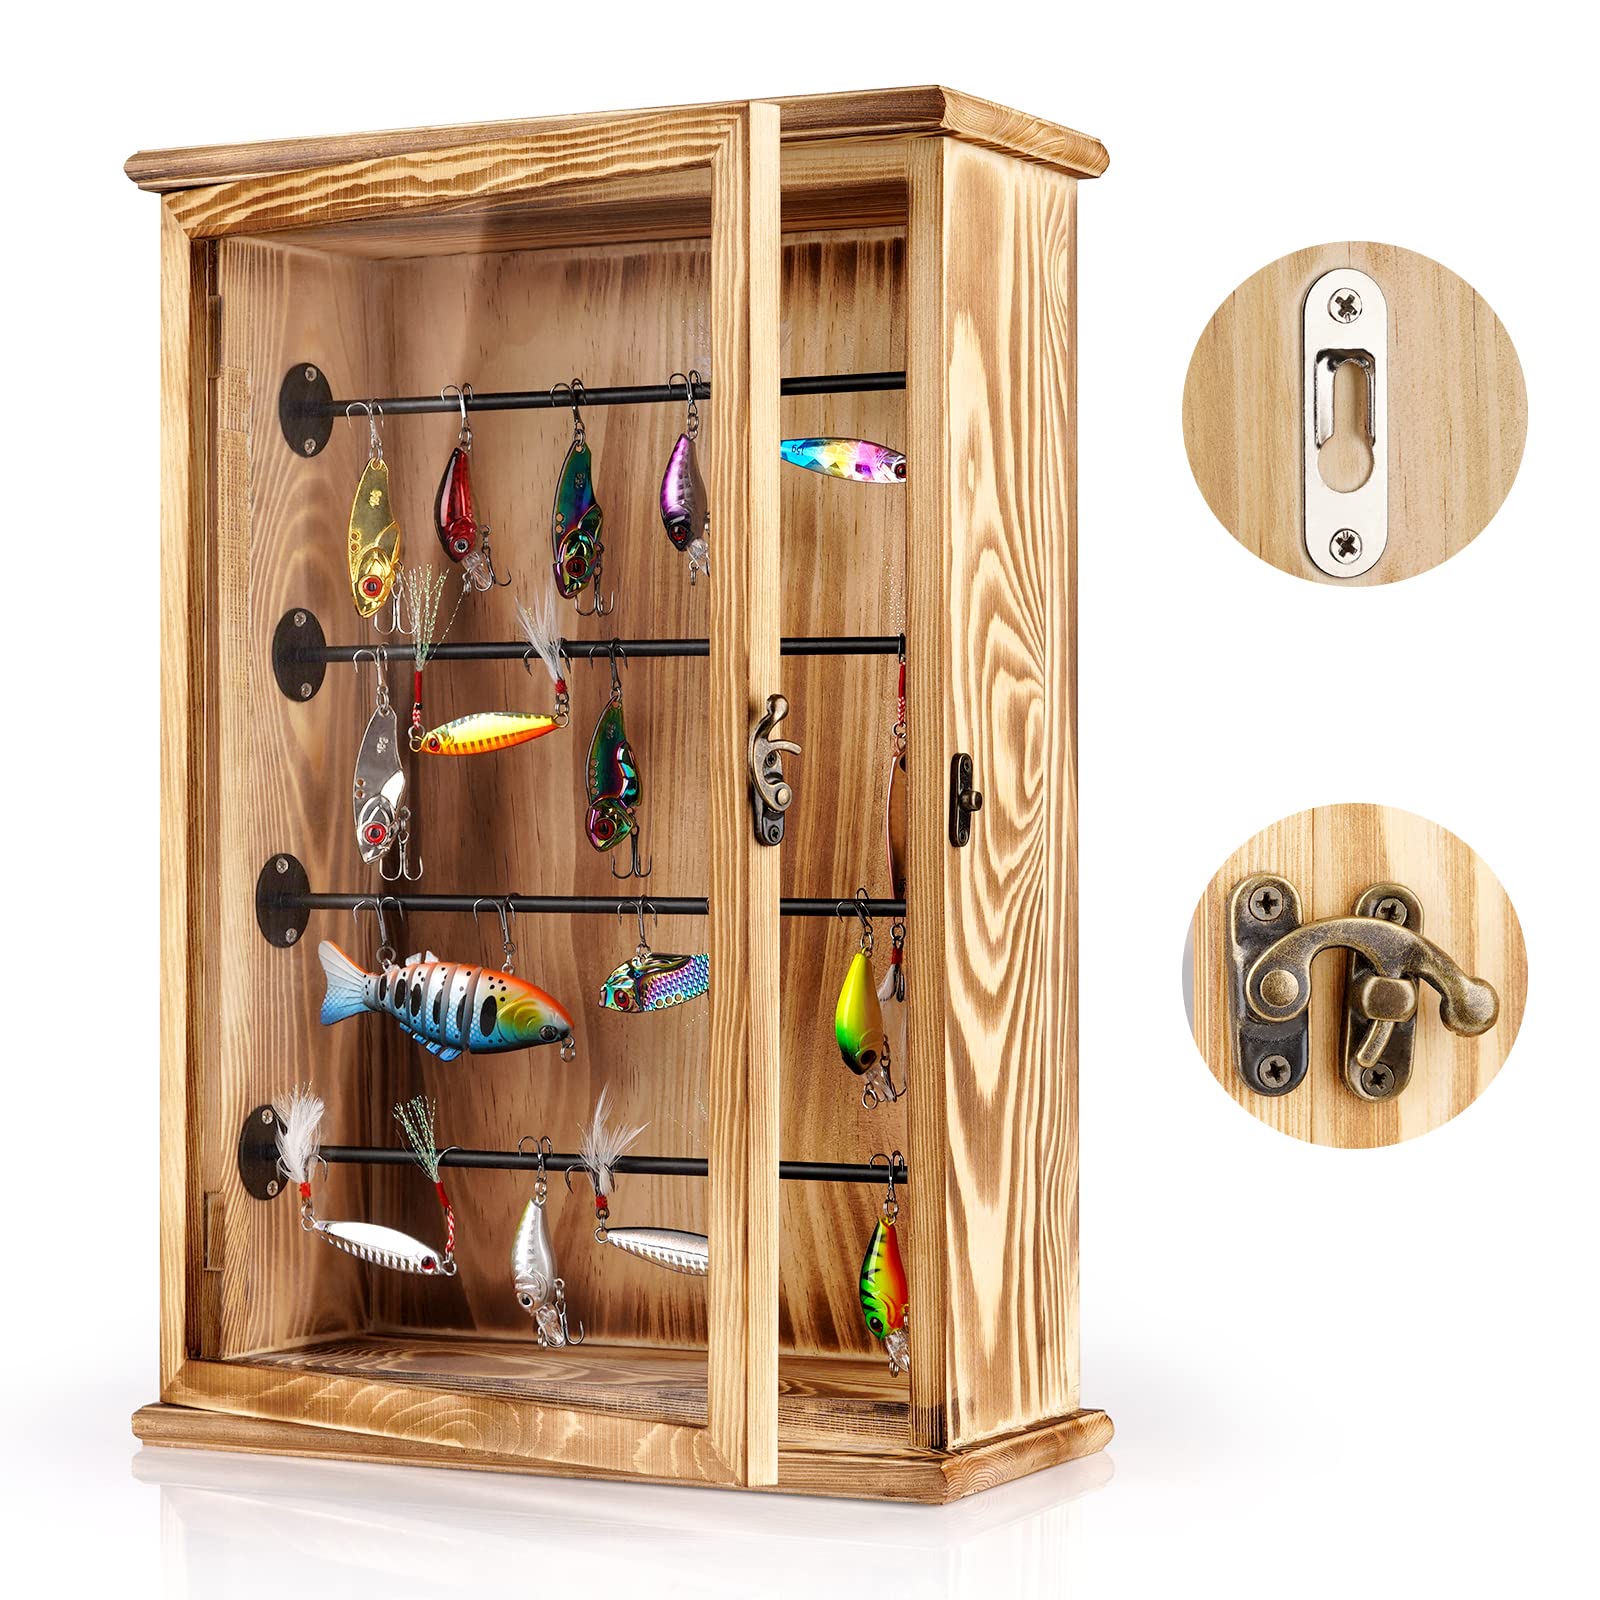 Ibnotuiy Fishing Lures Storage Display Case Wall Cabinet Tackle